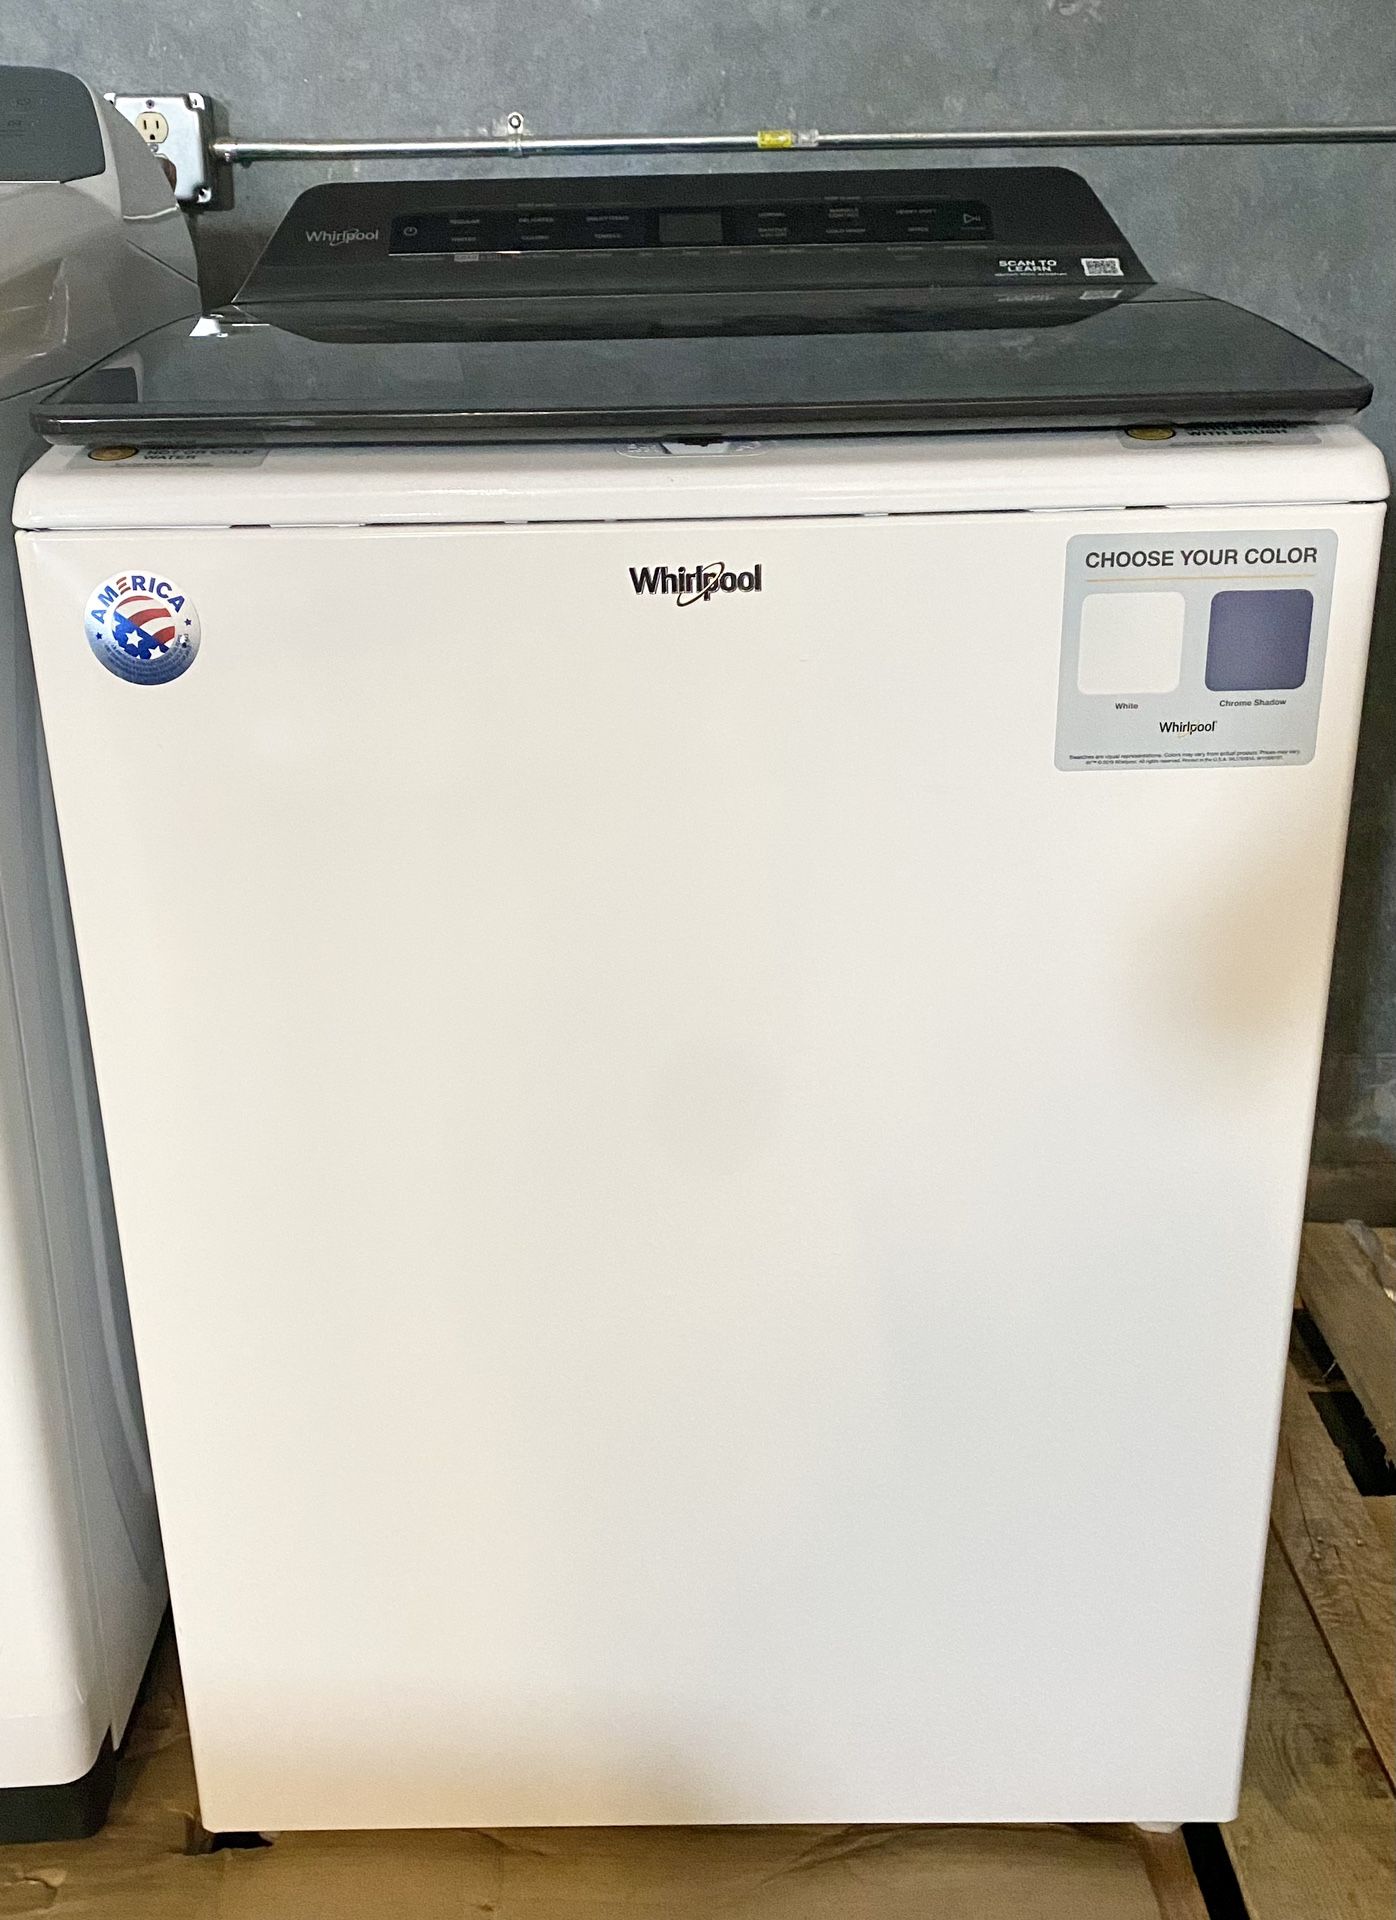 Whirlpool 5.2 cu.ft. top load washer